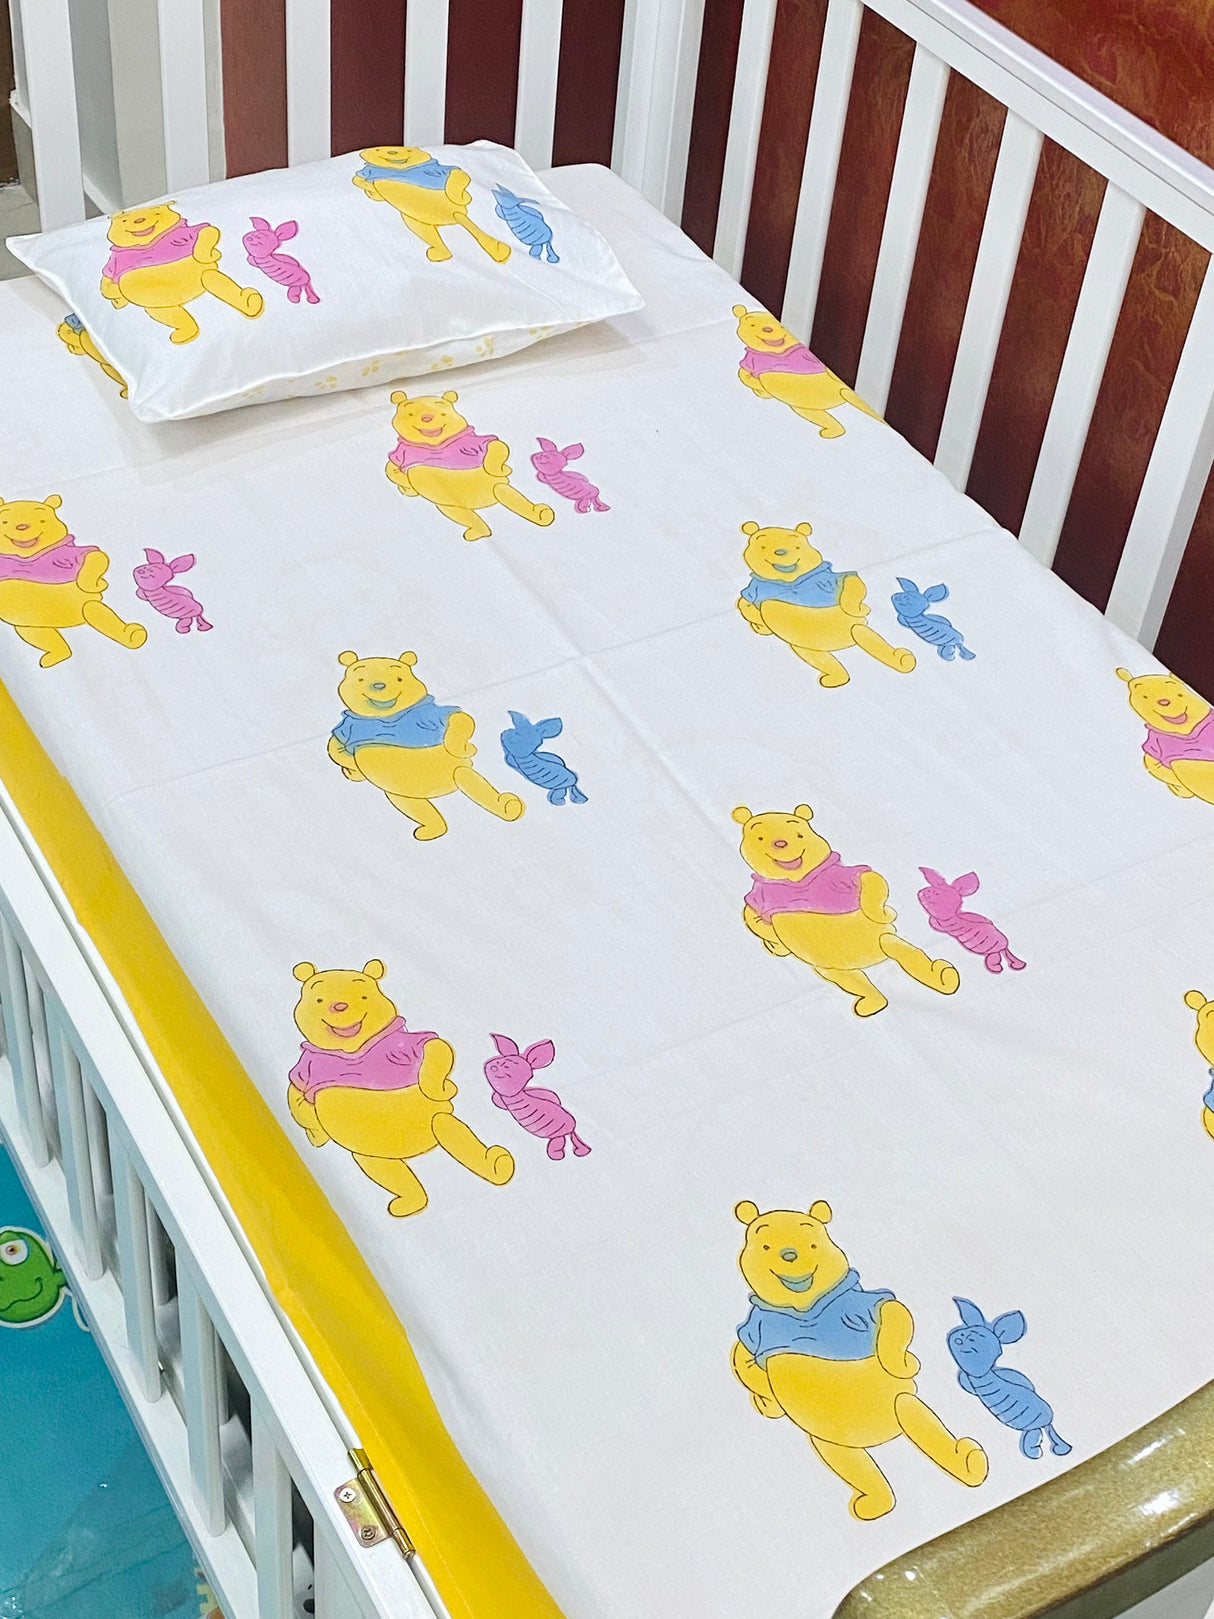 Cot Sheet- Pooh Blockprint Cotton -Cot Size (60-40 inches)